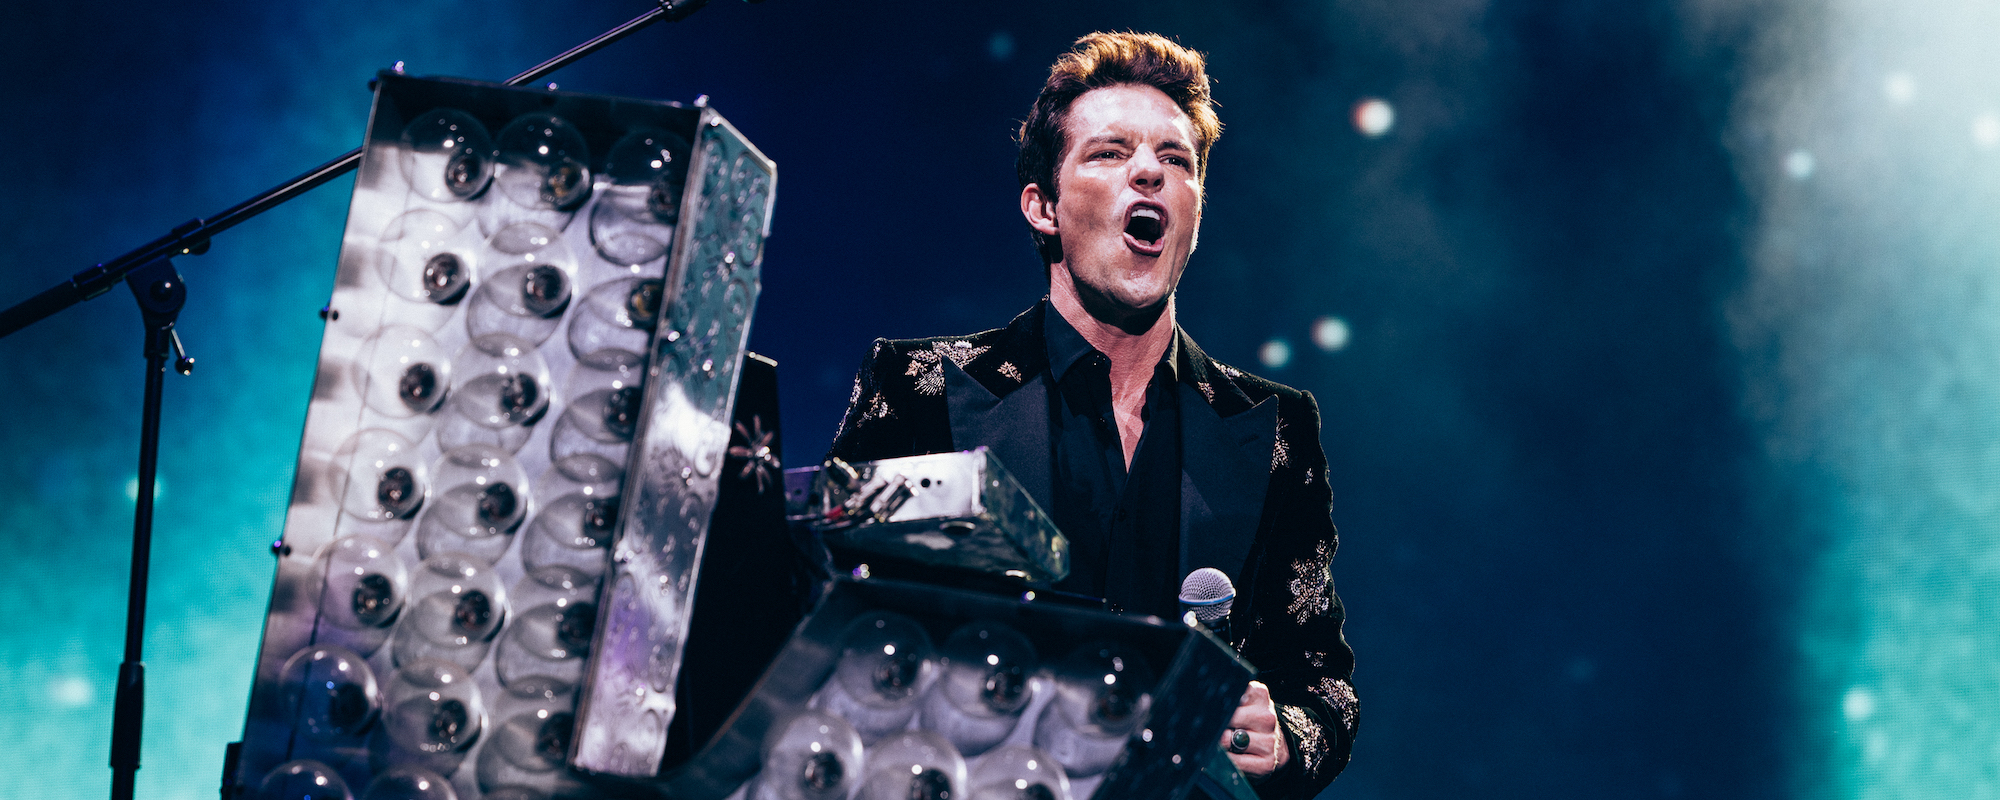 The Killers Tease New Single “Your Side of Town”